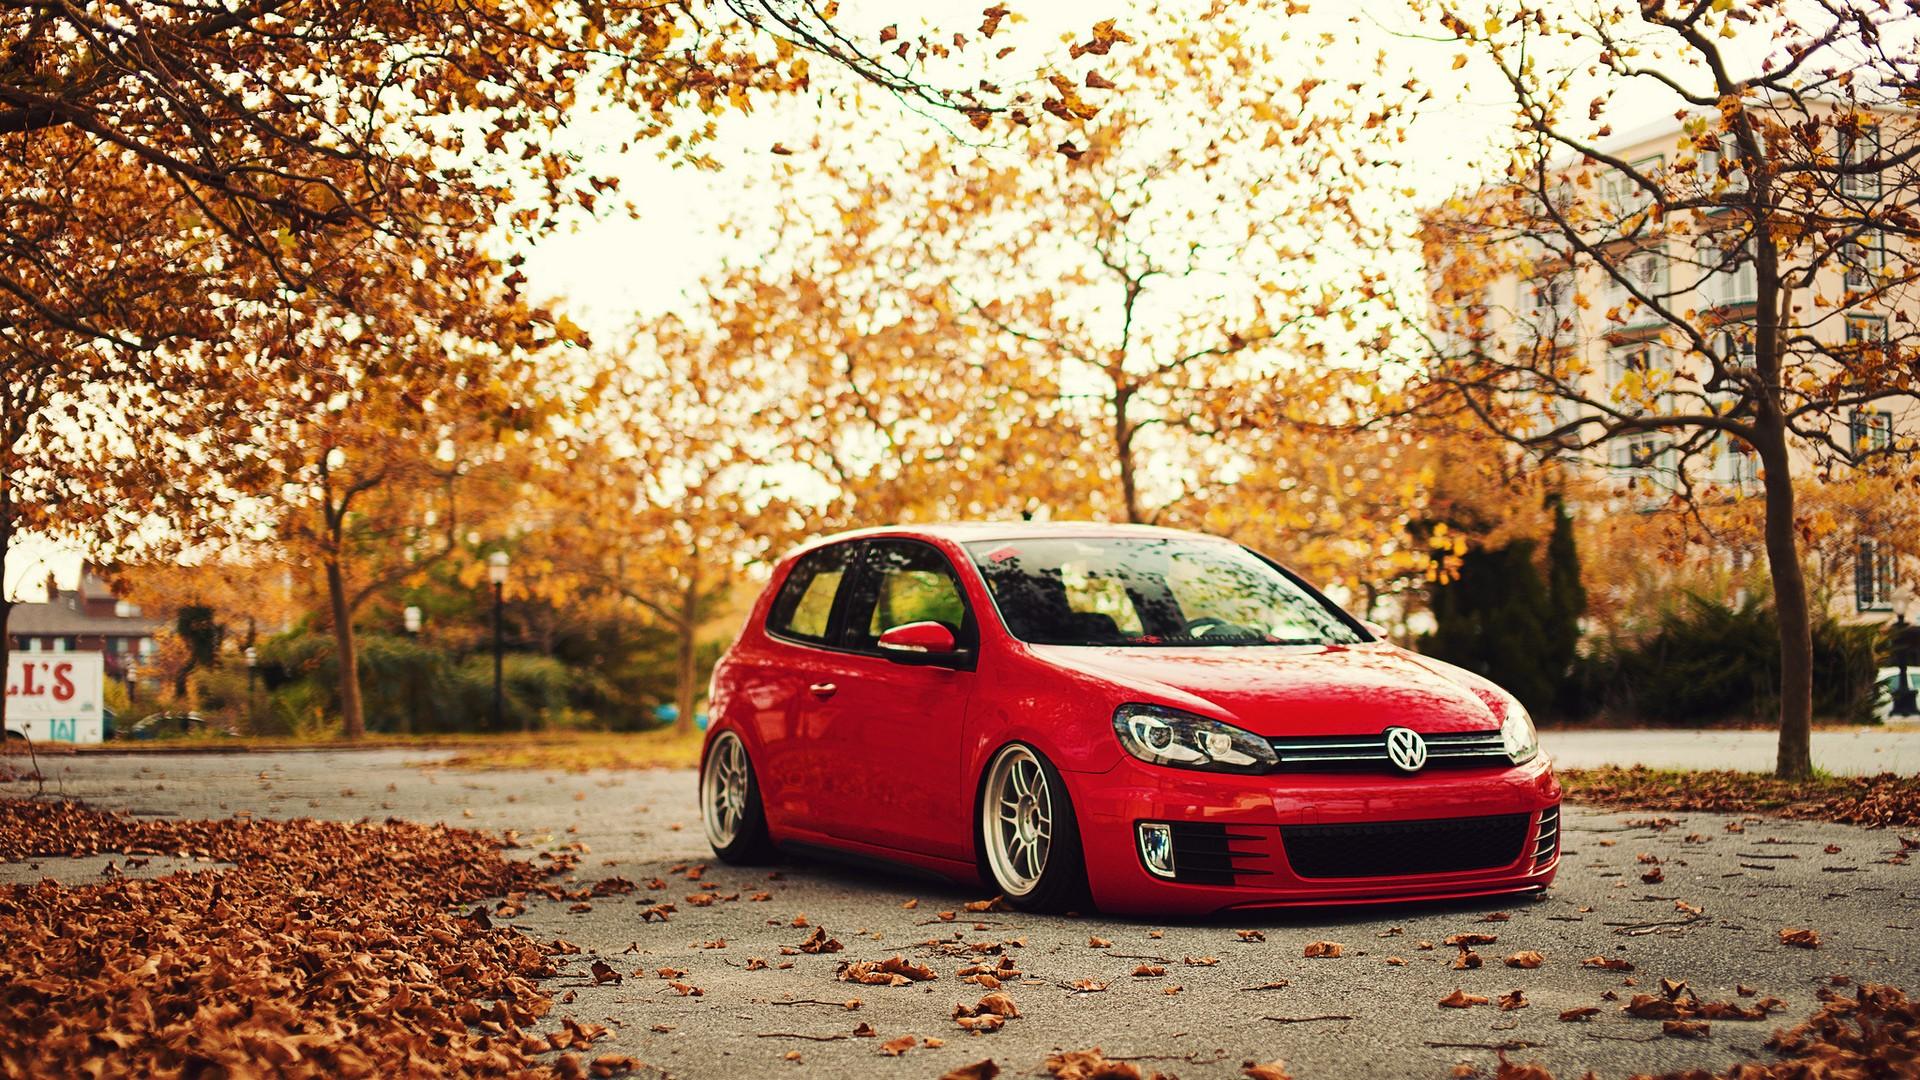 Download the Autumn GTI Stance Wallpaper, Autumn GTI Stance iPhone